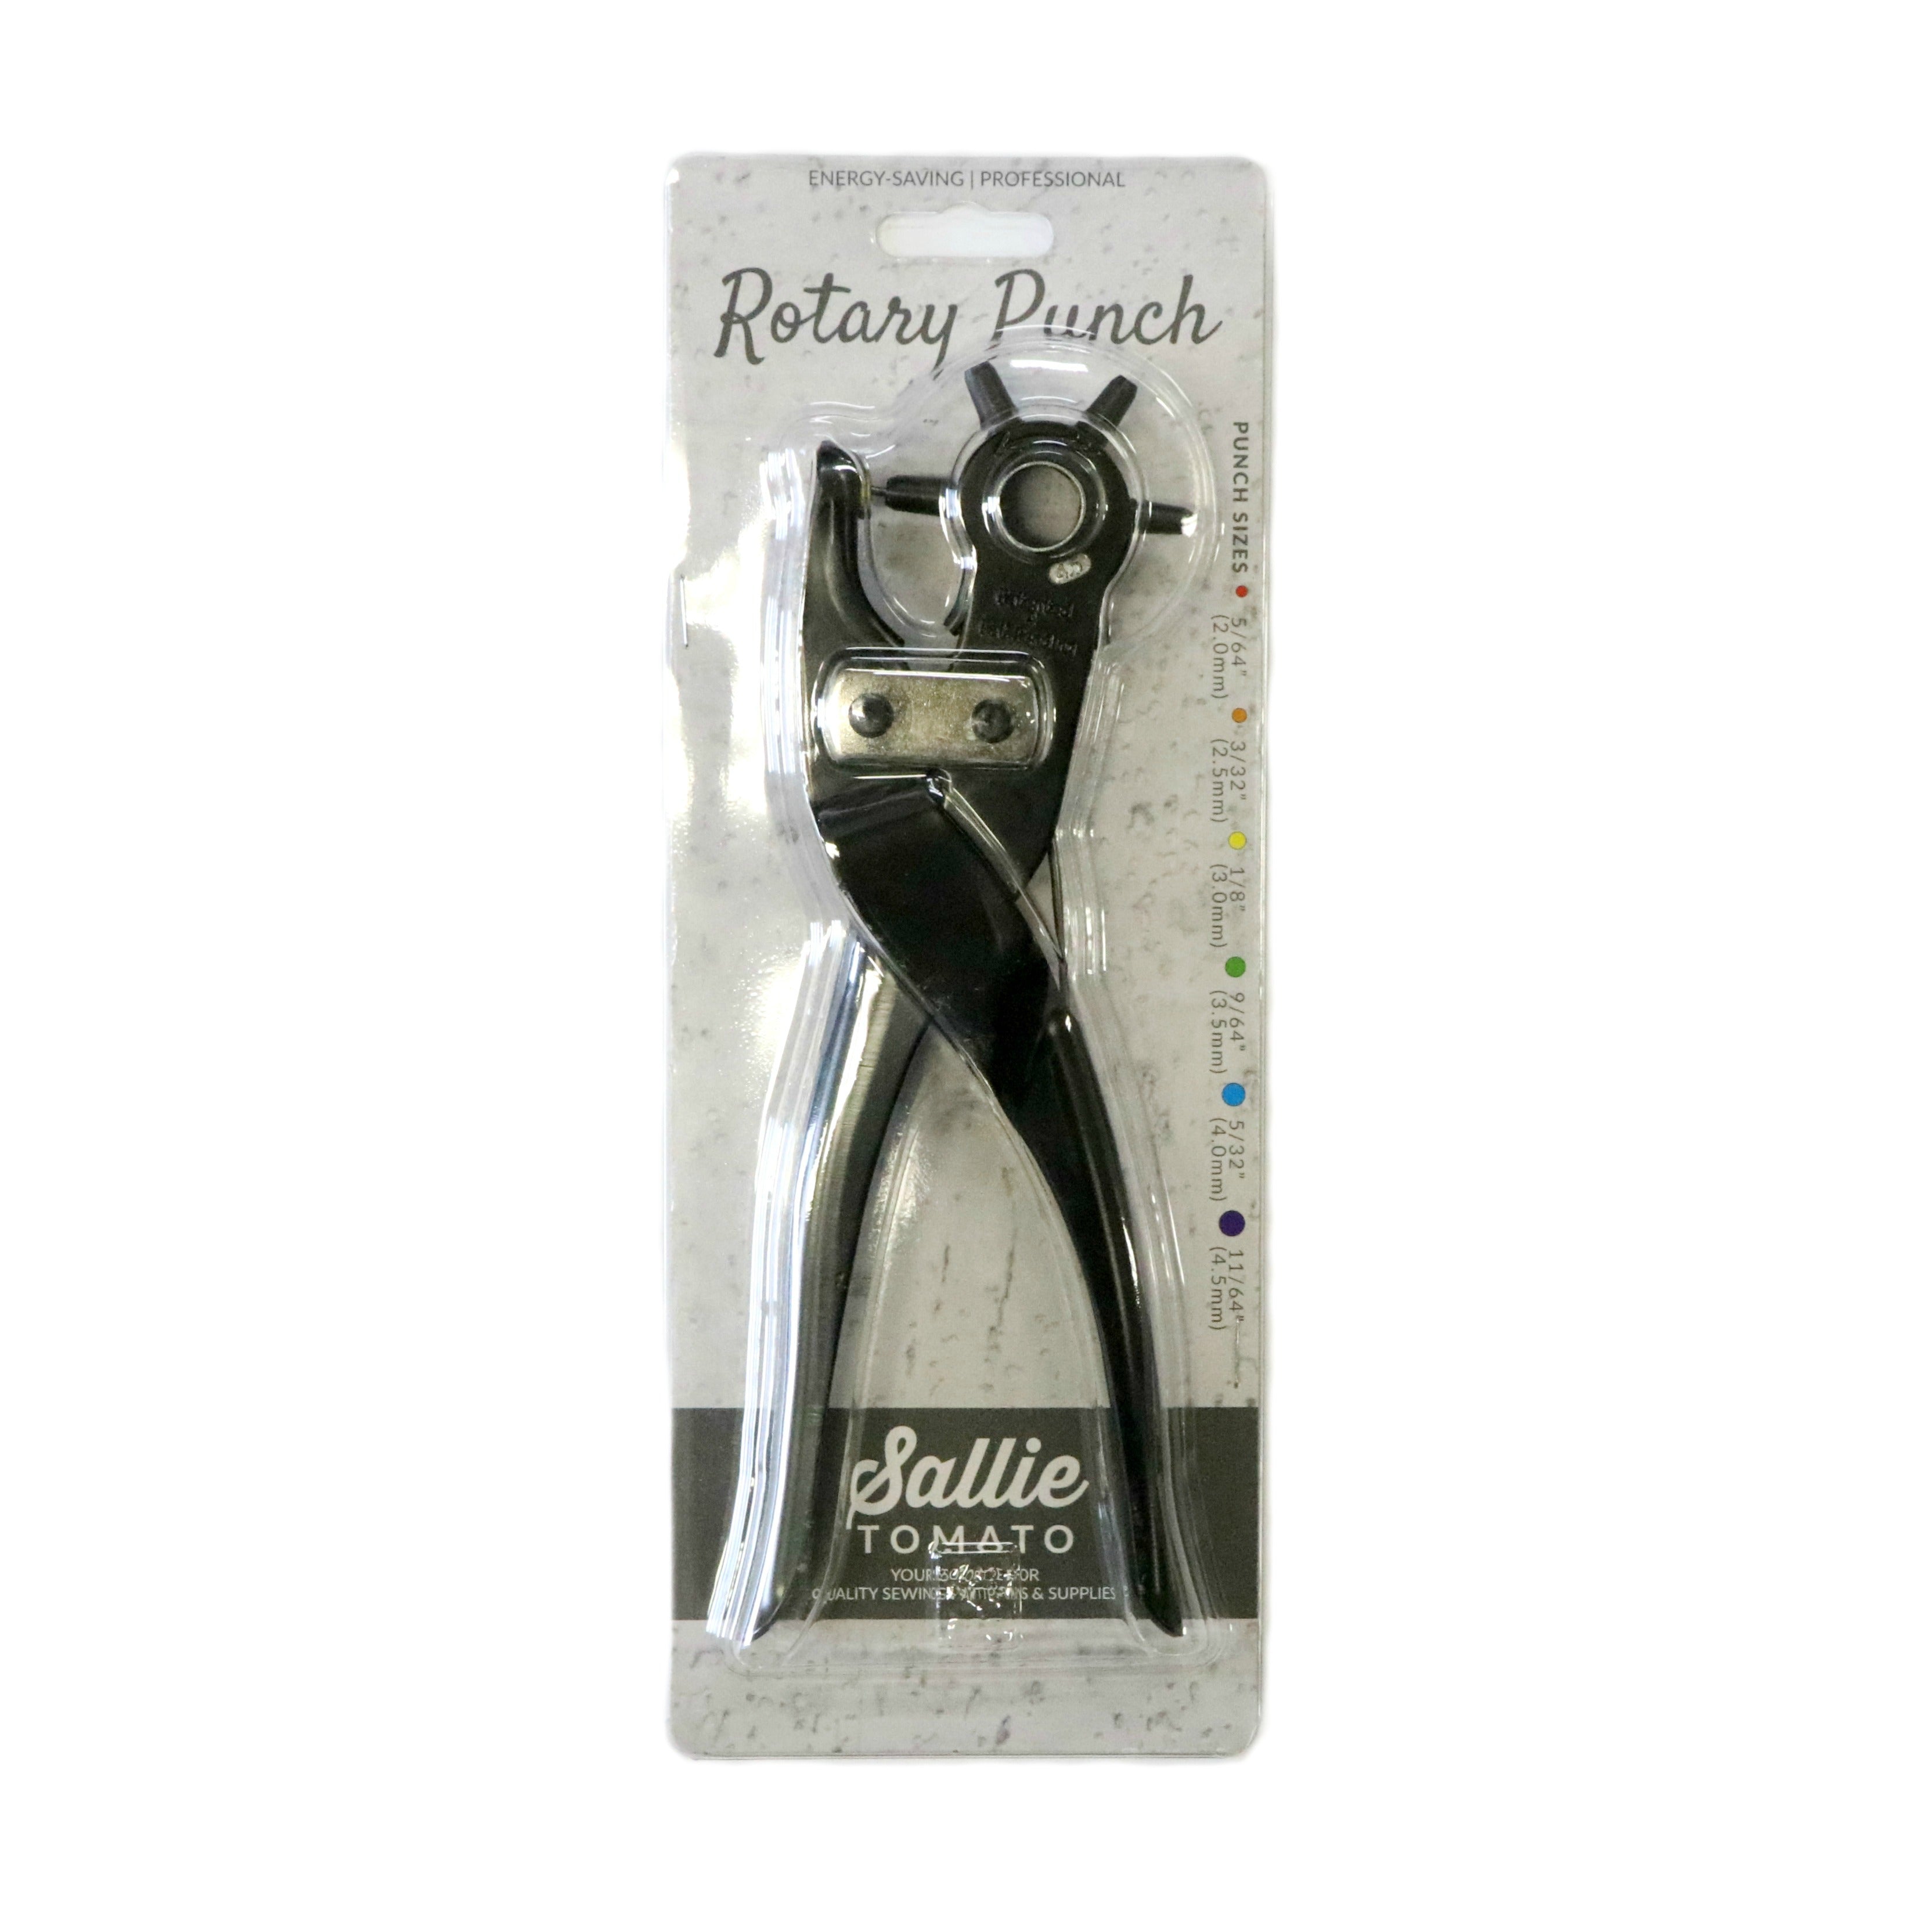 Leather Hole Punch Pliers, 3/32 3/16 Hole Sizes, 6 Punch Wheels